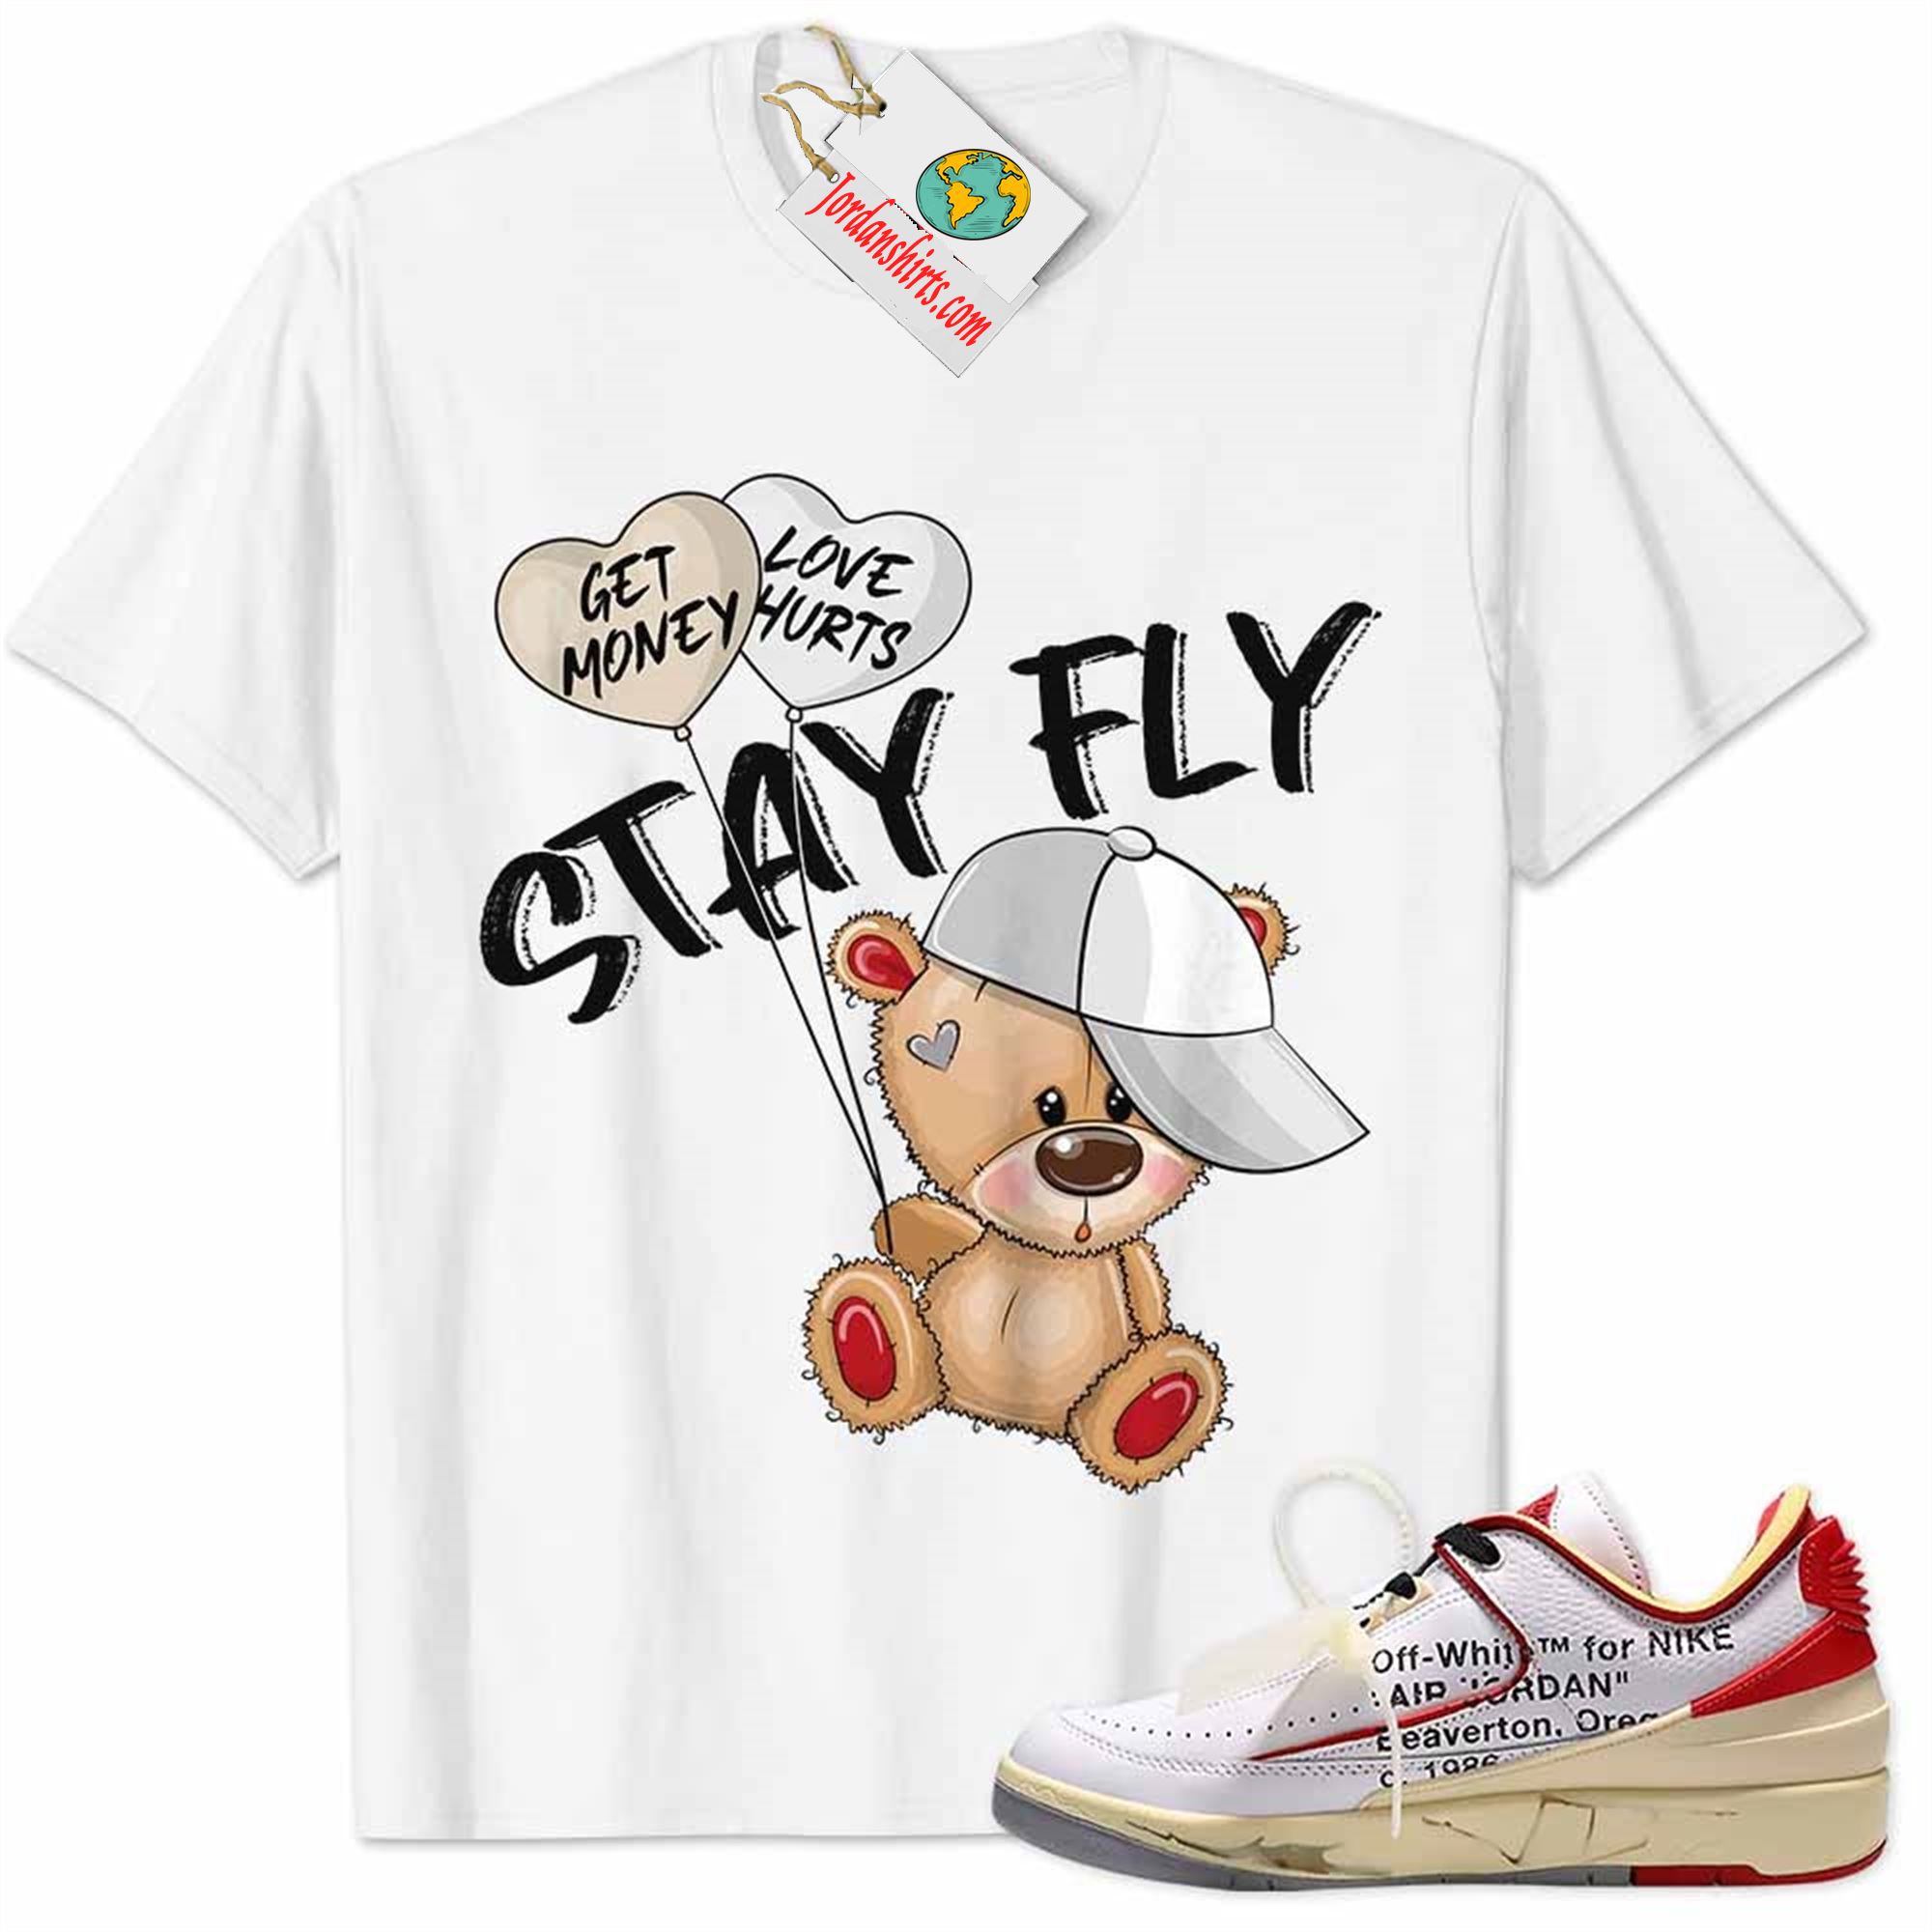 Jordan 2 Shirt, Low White Red Off-white 2s Shirt Cute Teddy Bear Stay Fly Get Money White Size Up To 5xl